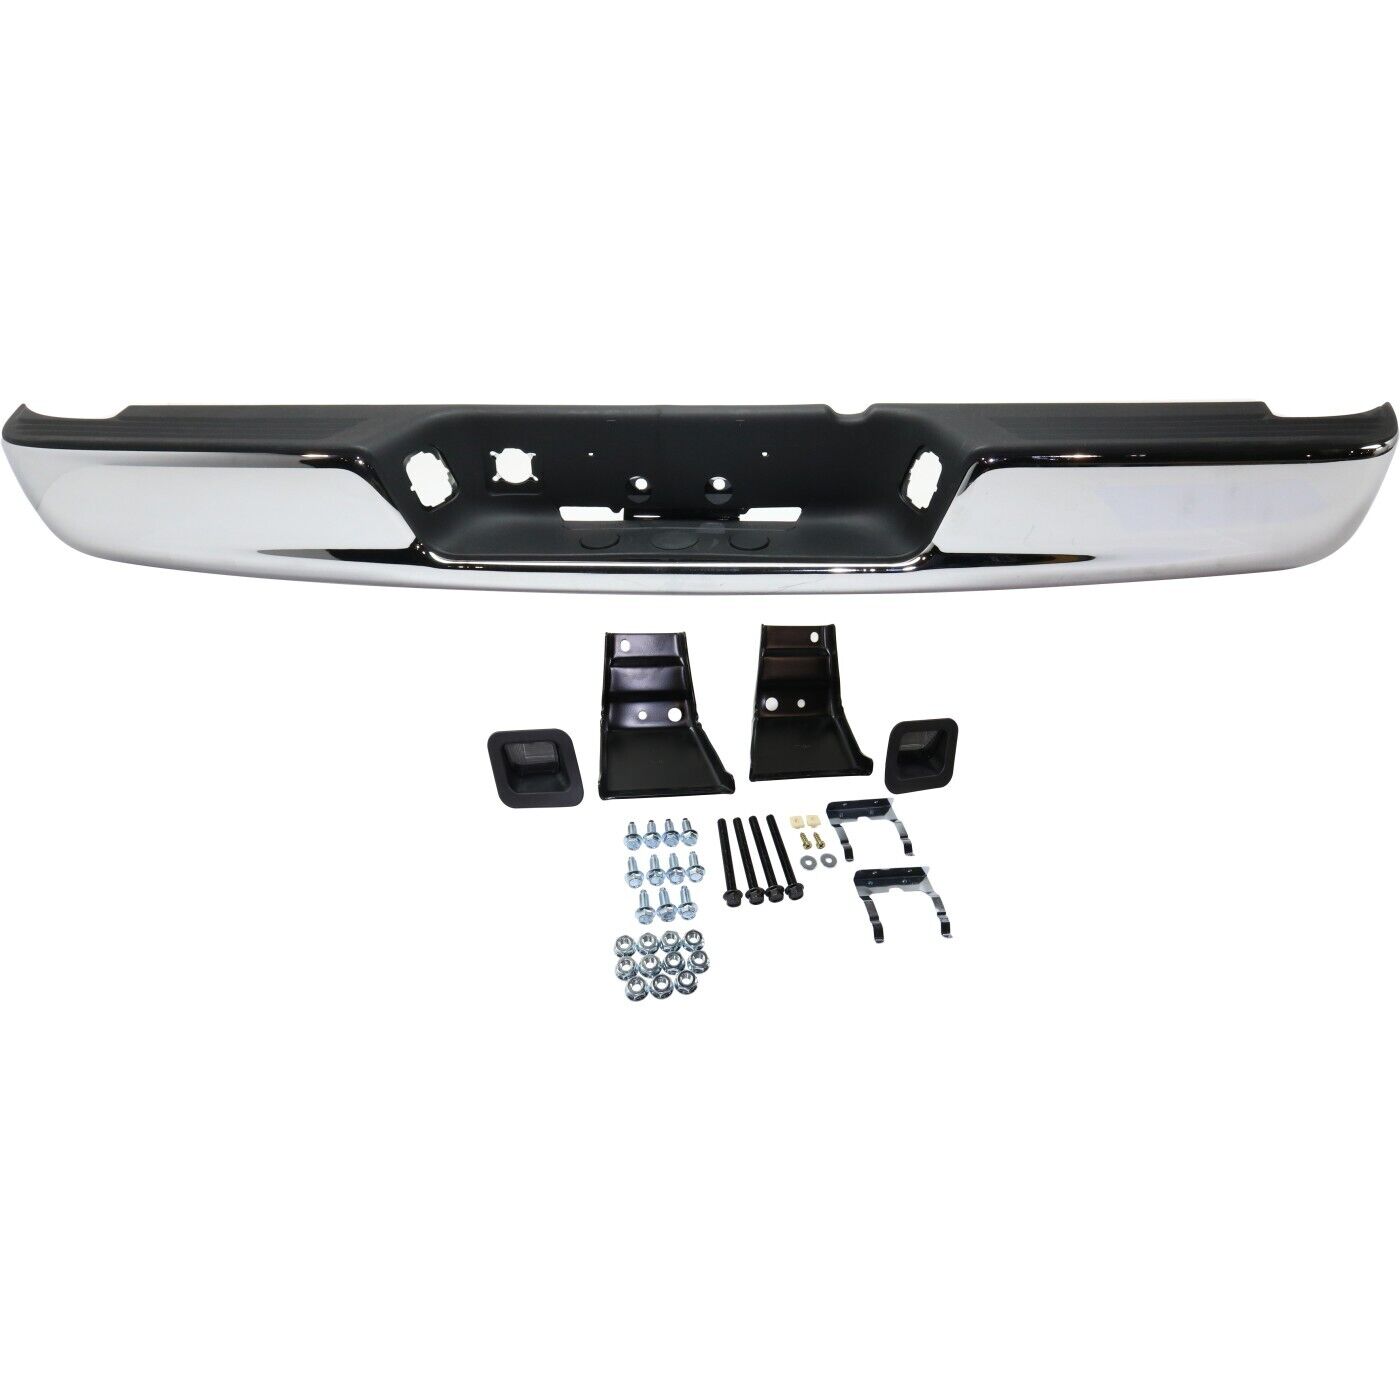 Step Bumper Assembly For 2002-2008 Dodge Ram 1500 Chrome With Mounting Bracket